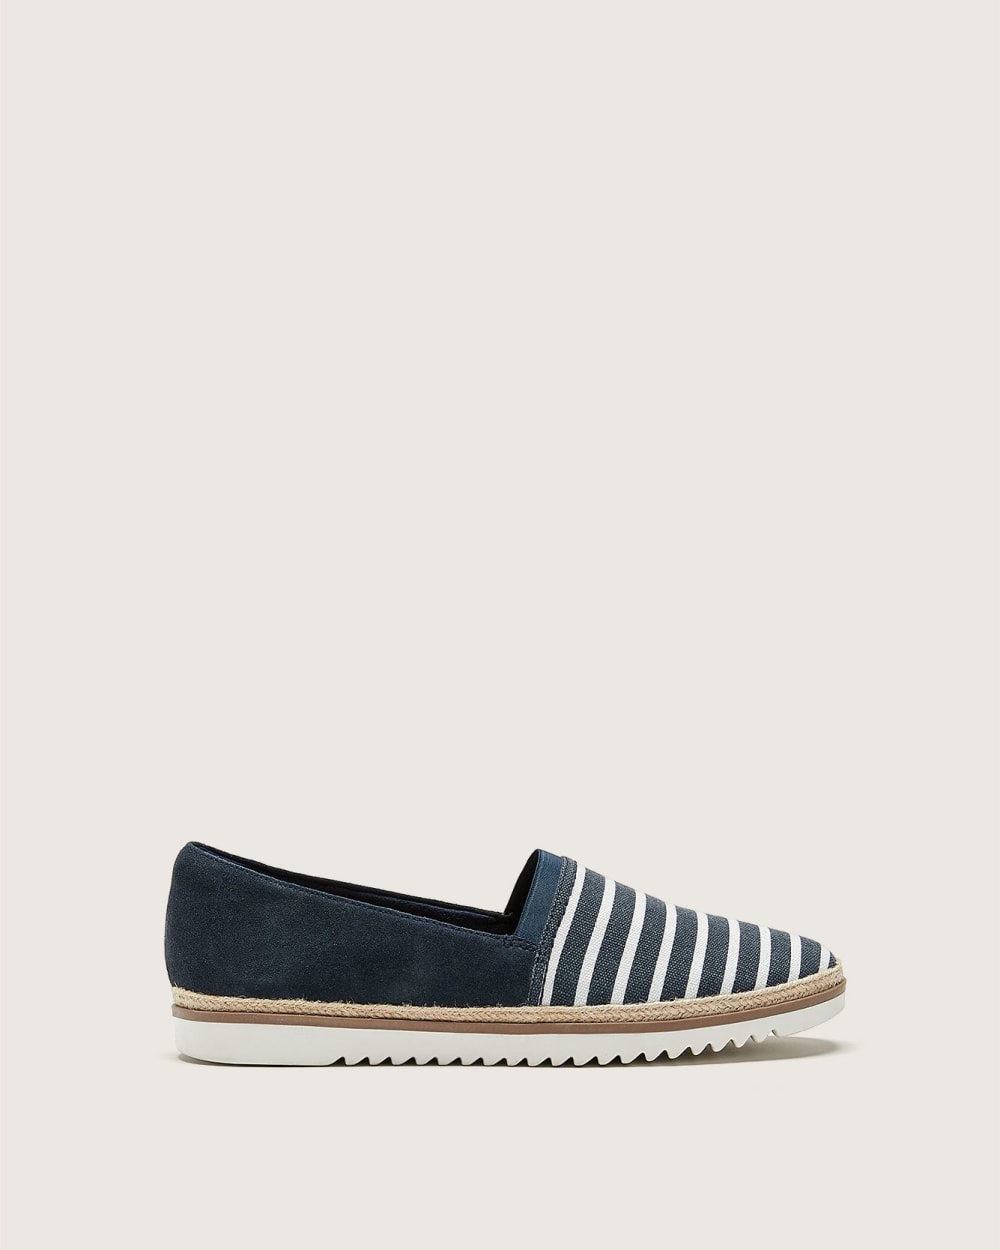 Chaussures Serena Paige, pied large - Clarks